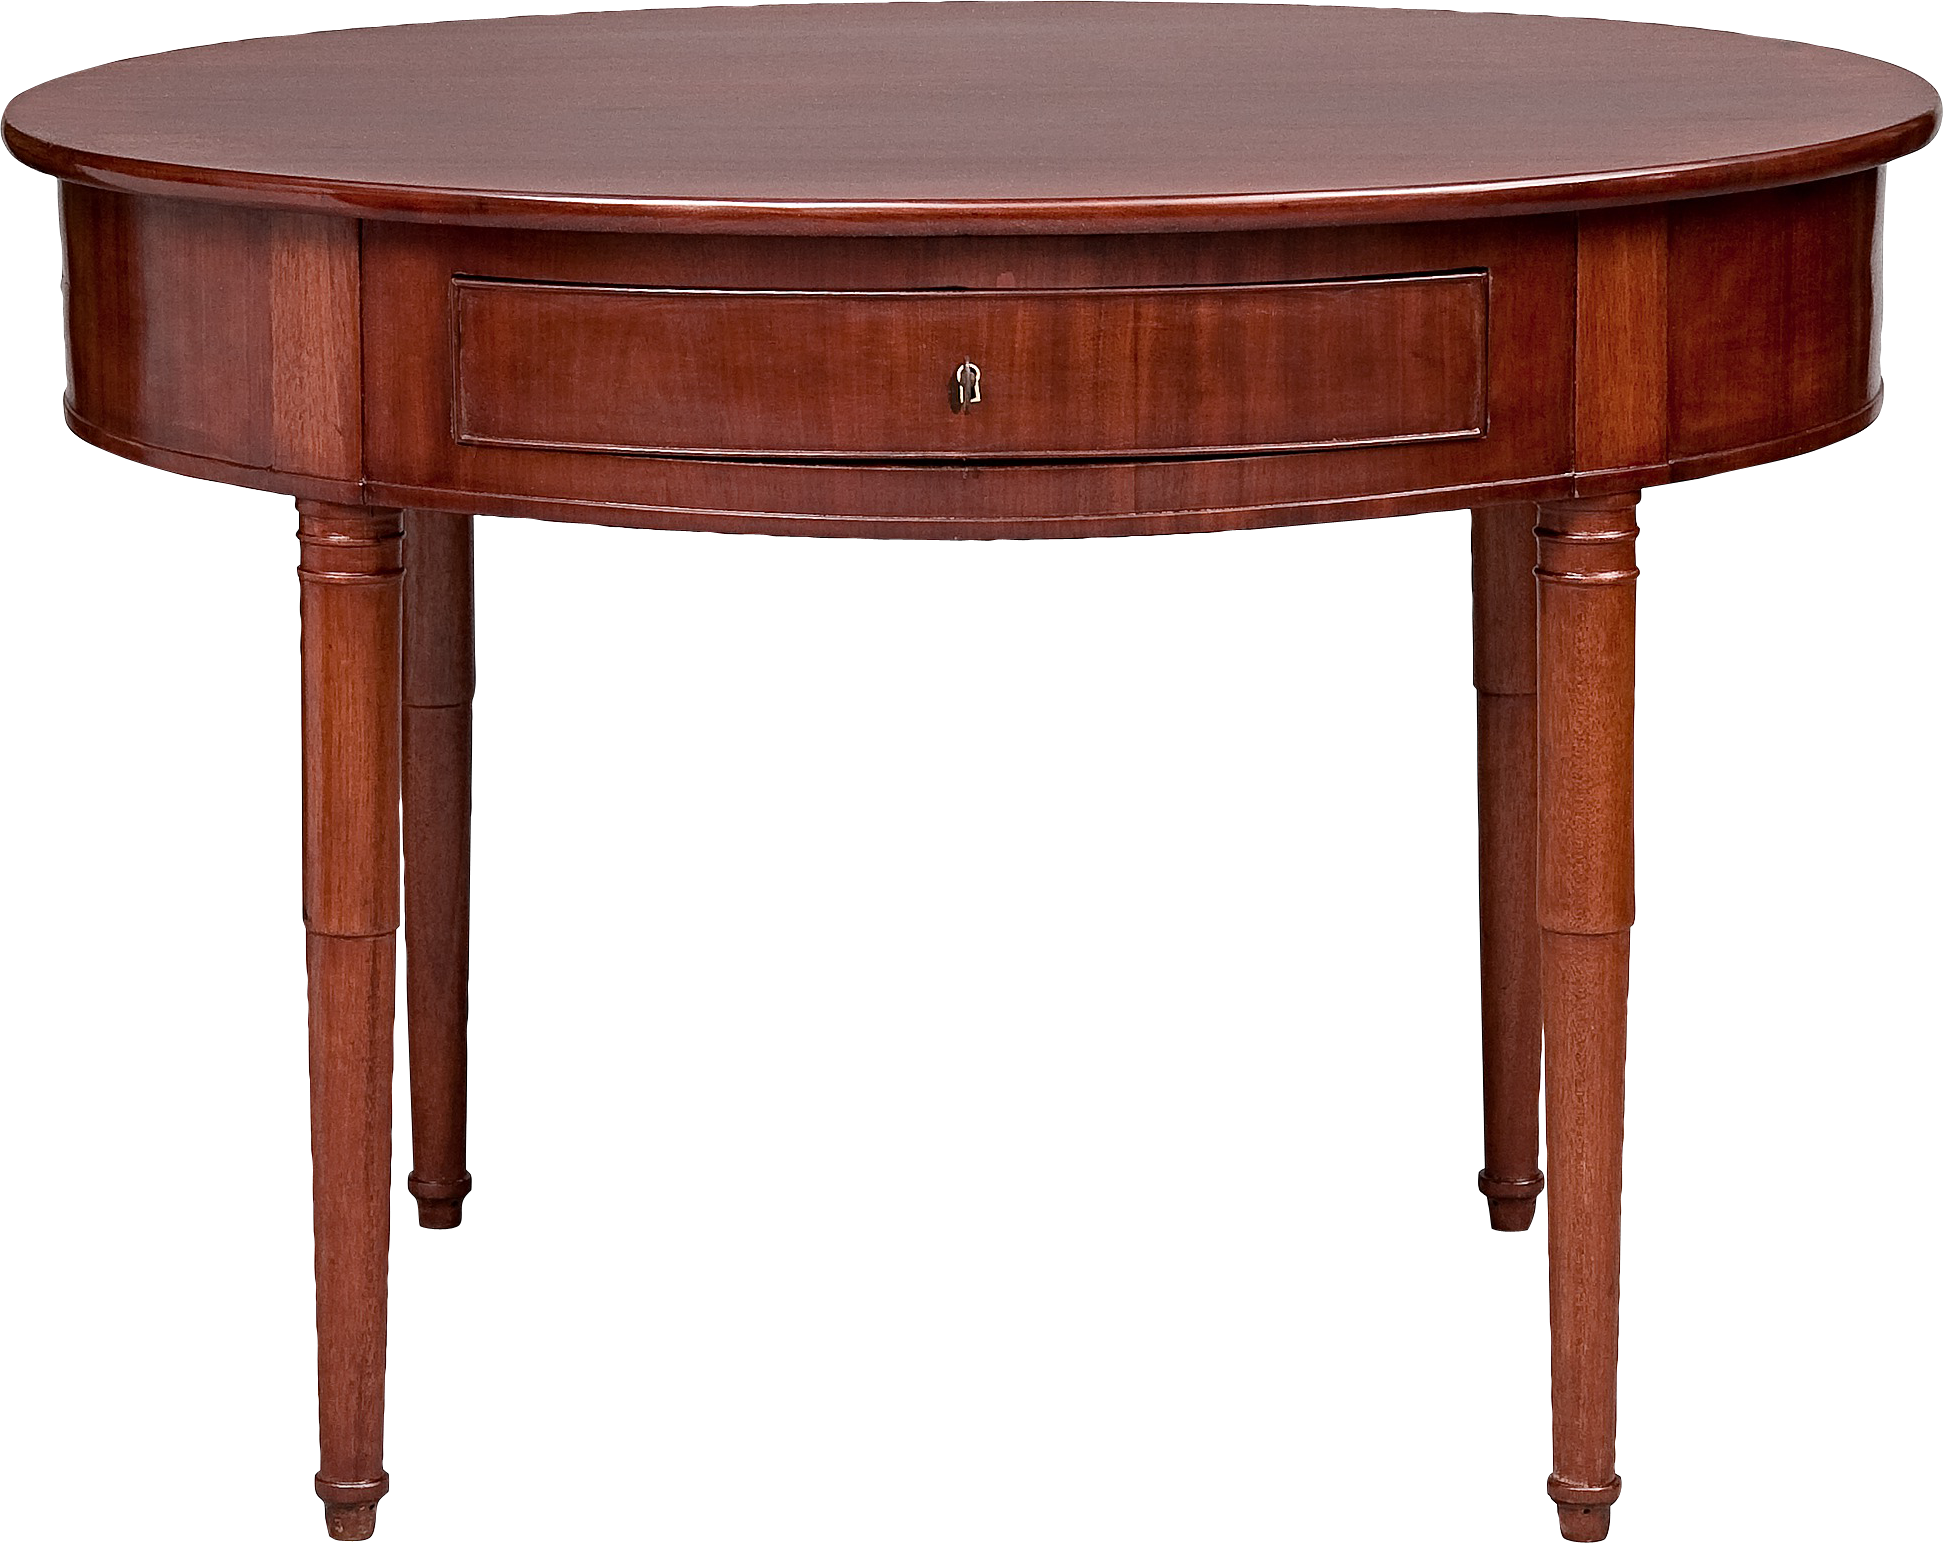 Table Png Image Transparent Image Download, Size: 1943x1543px Pertaining To Transparent Side Tables For Living Rooms (Gallery 18 of 20)